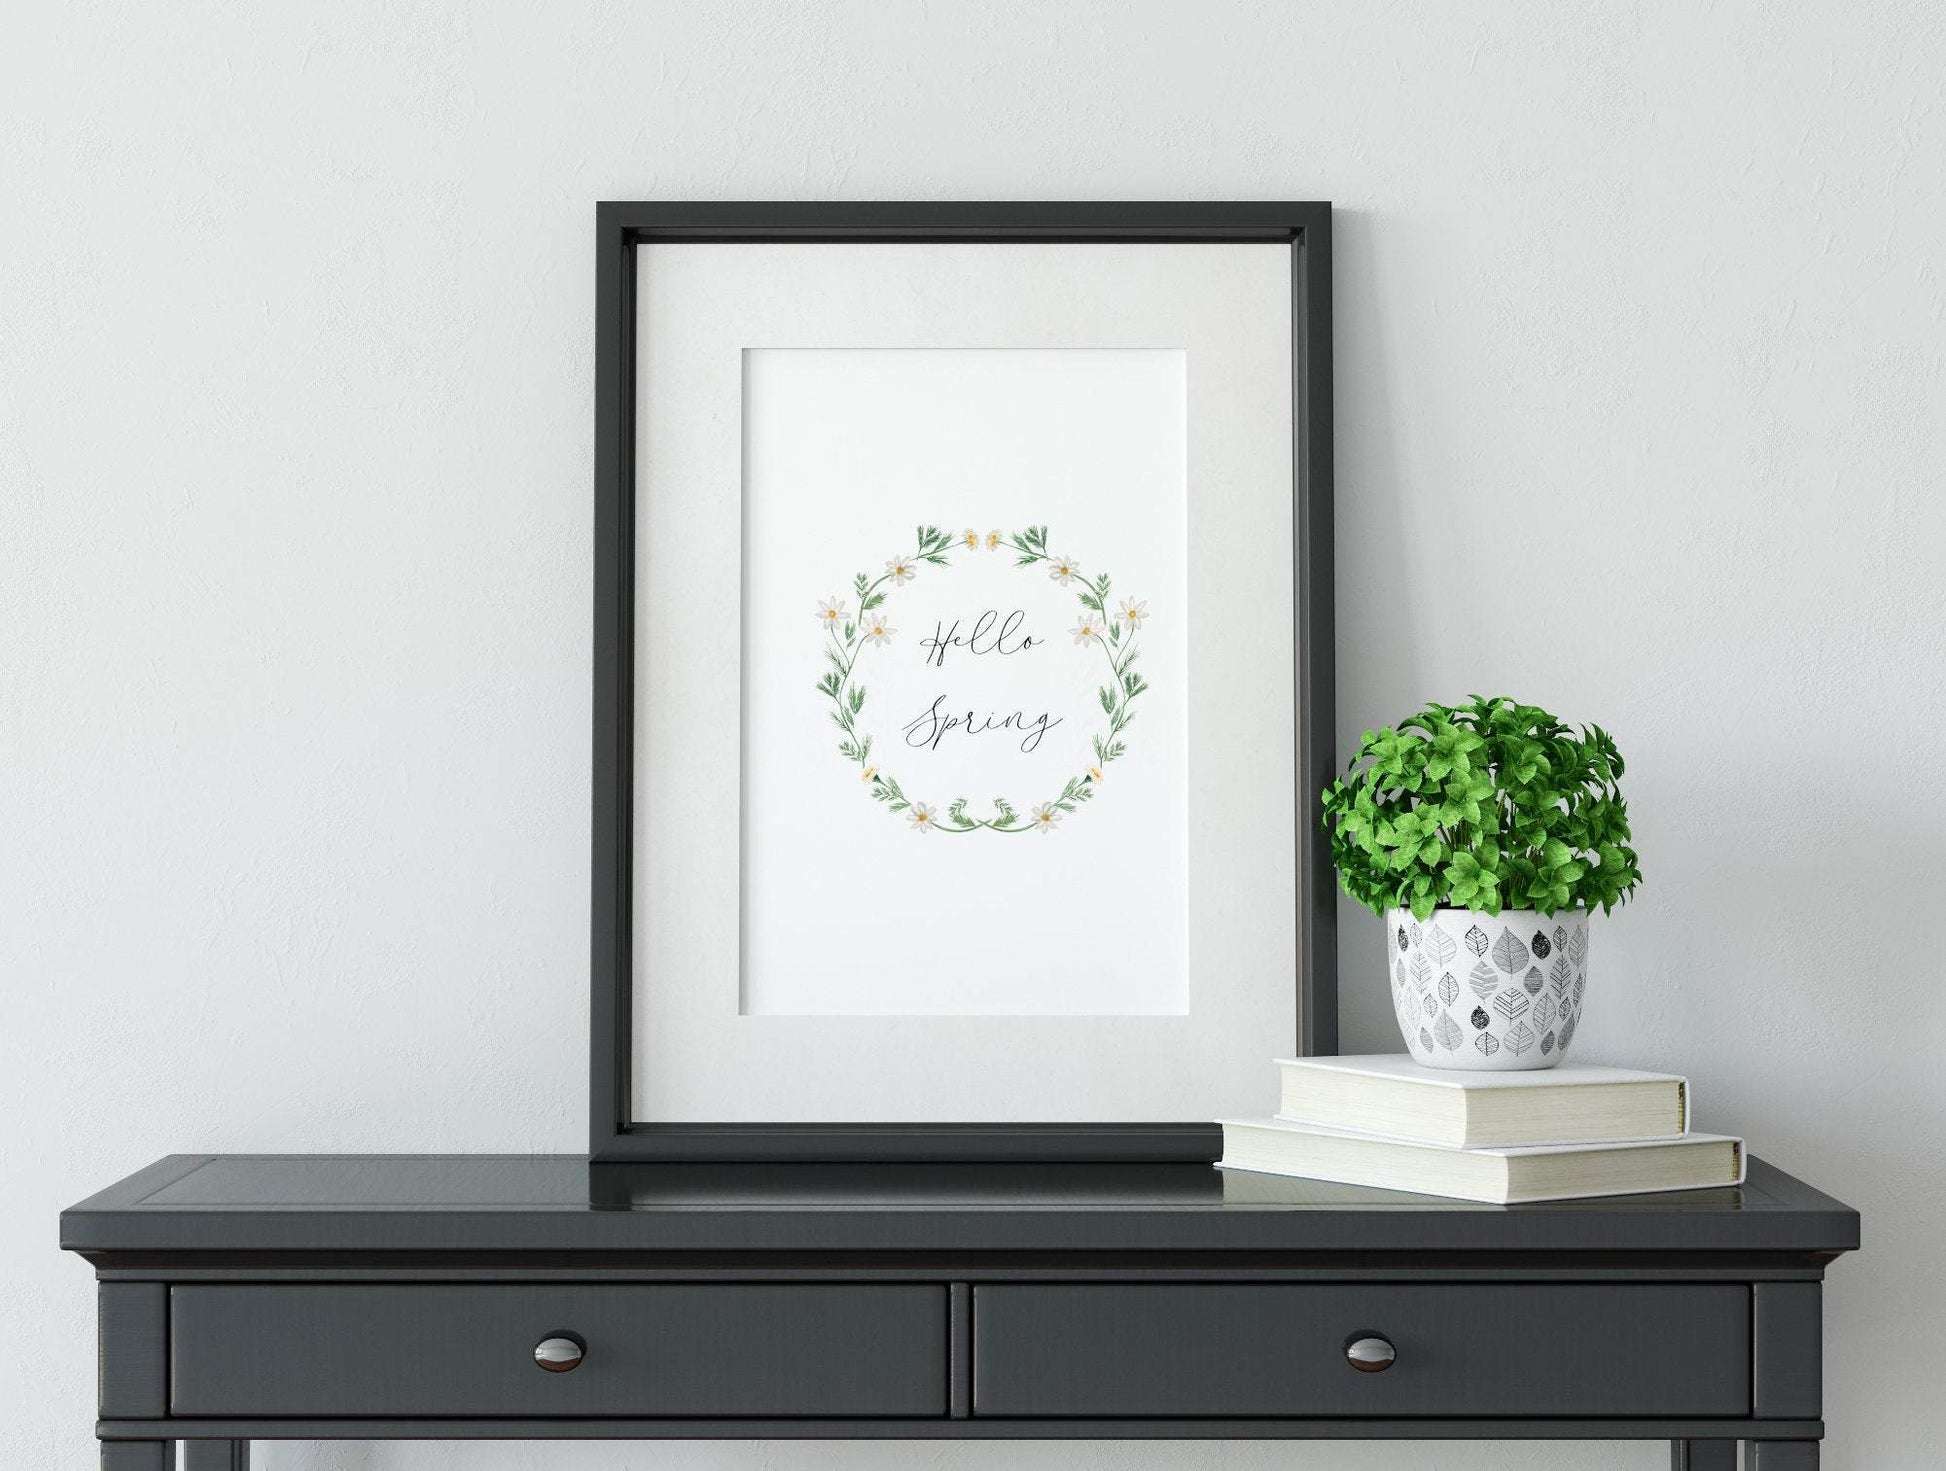 Spring flowers art print - Dolly and Fred Designs